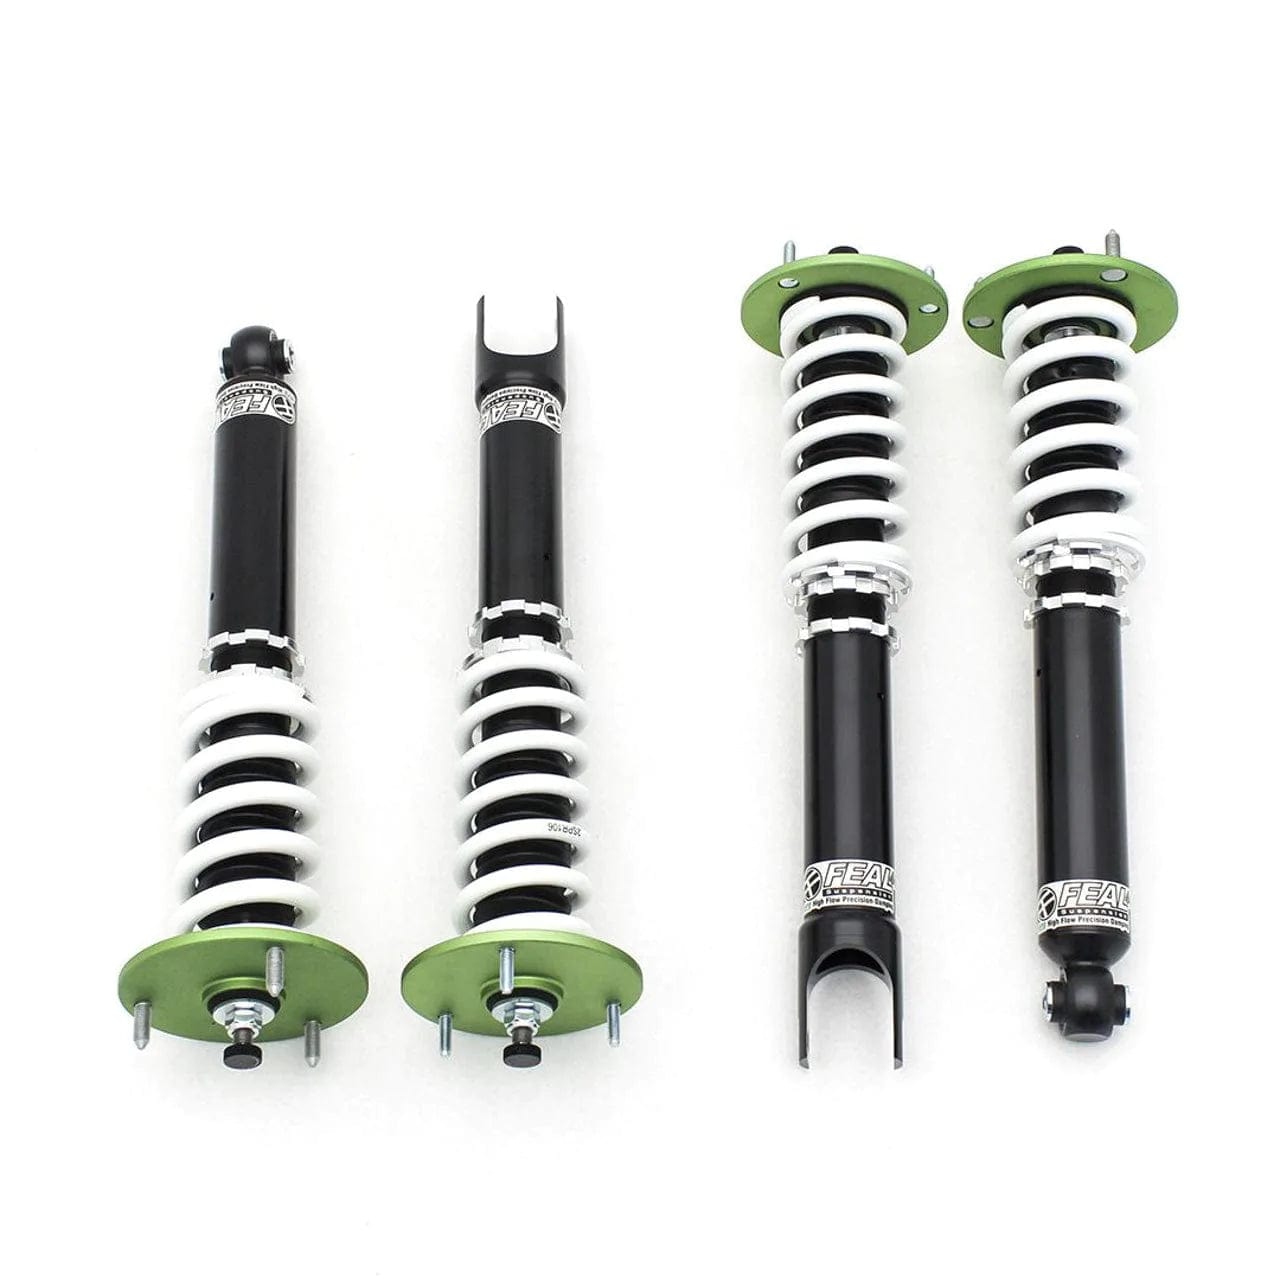 Feal 441 Heavy Front Coilovers - 1994-2004 Ford Mustang SN95 441FO-02H